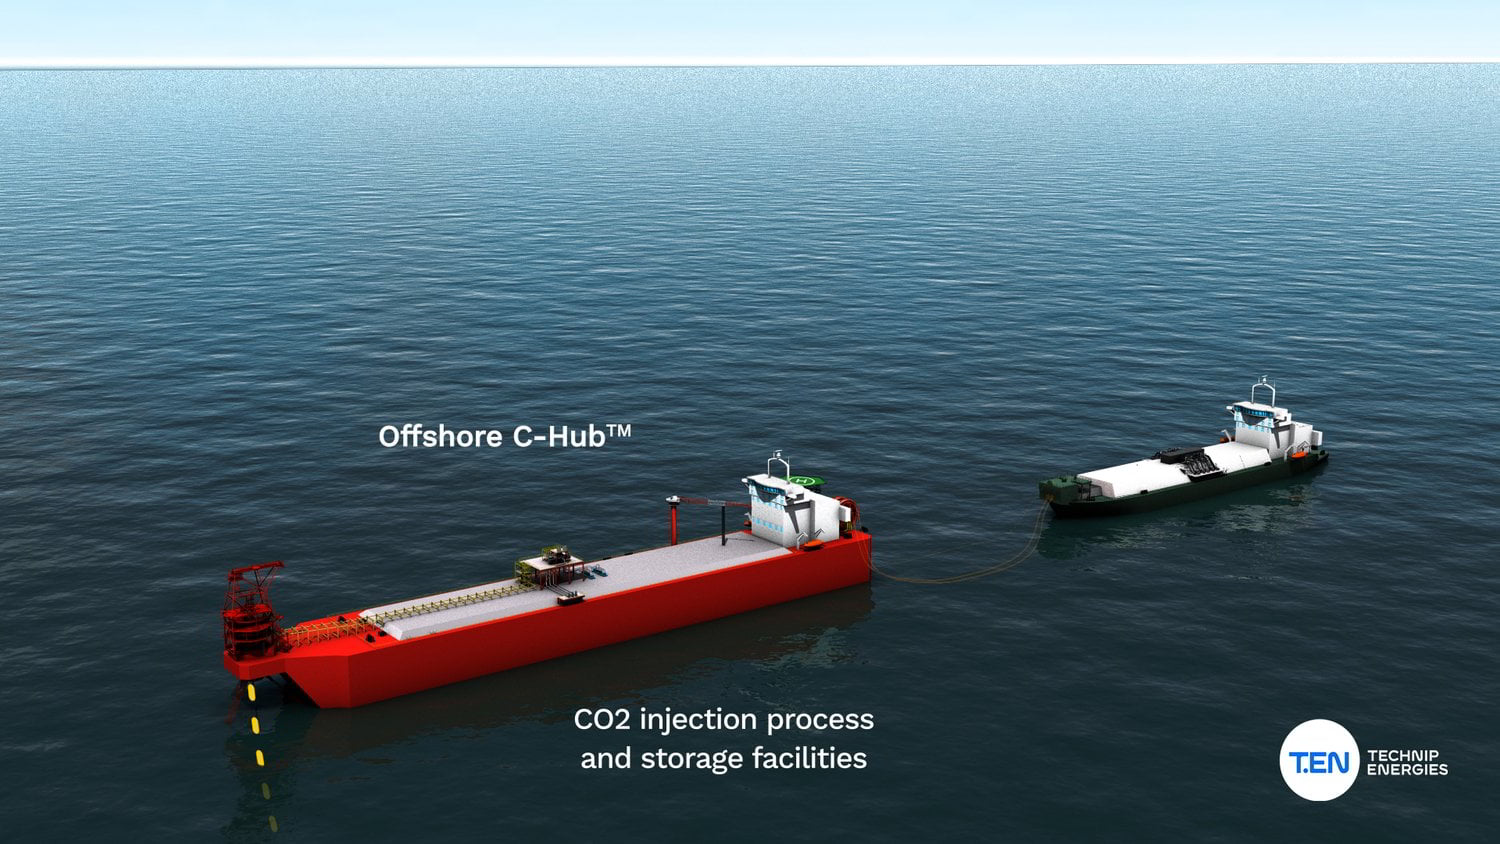 Three players pooling resources to develop ‘first offshore floating CCS hub project in Asia Pacific’